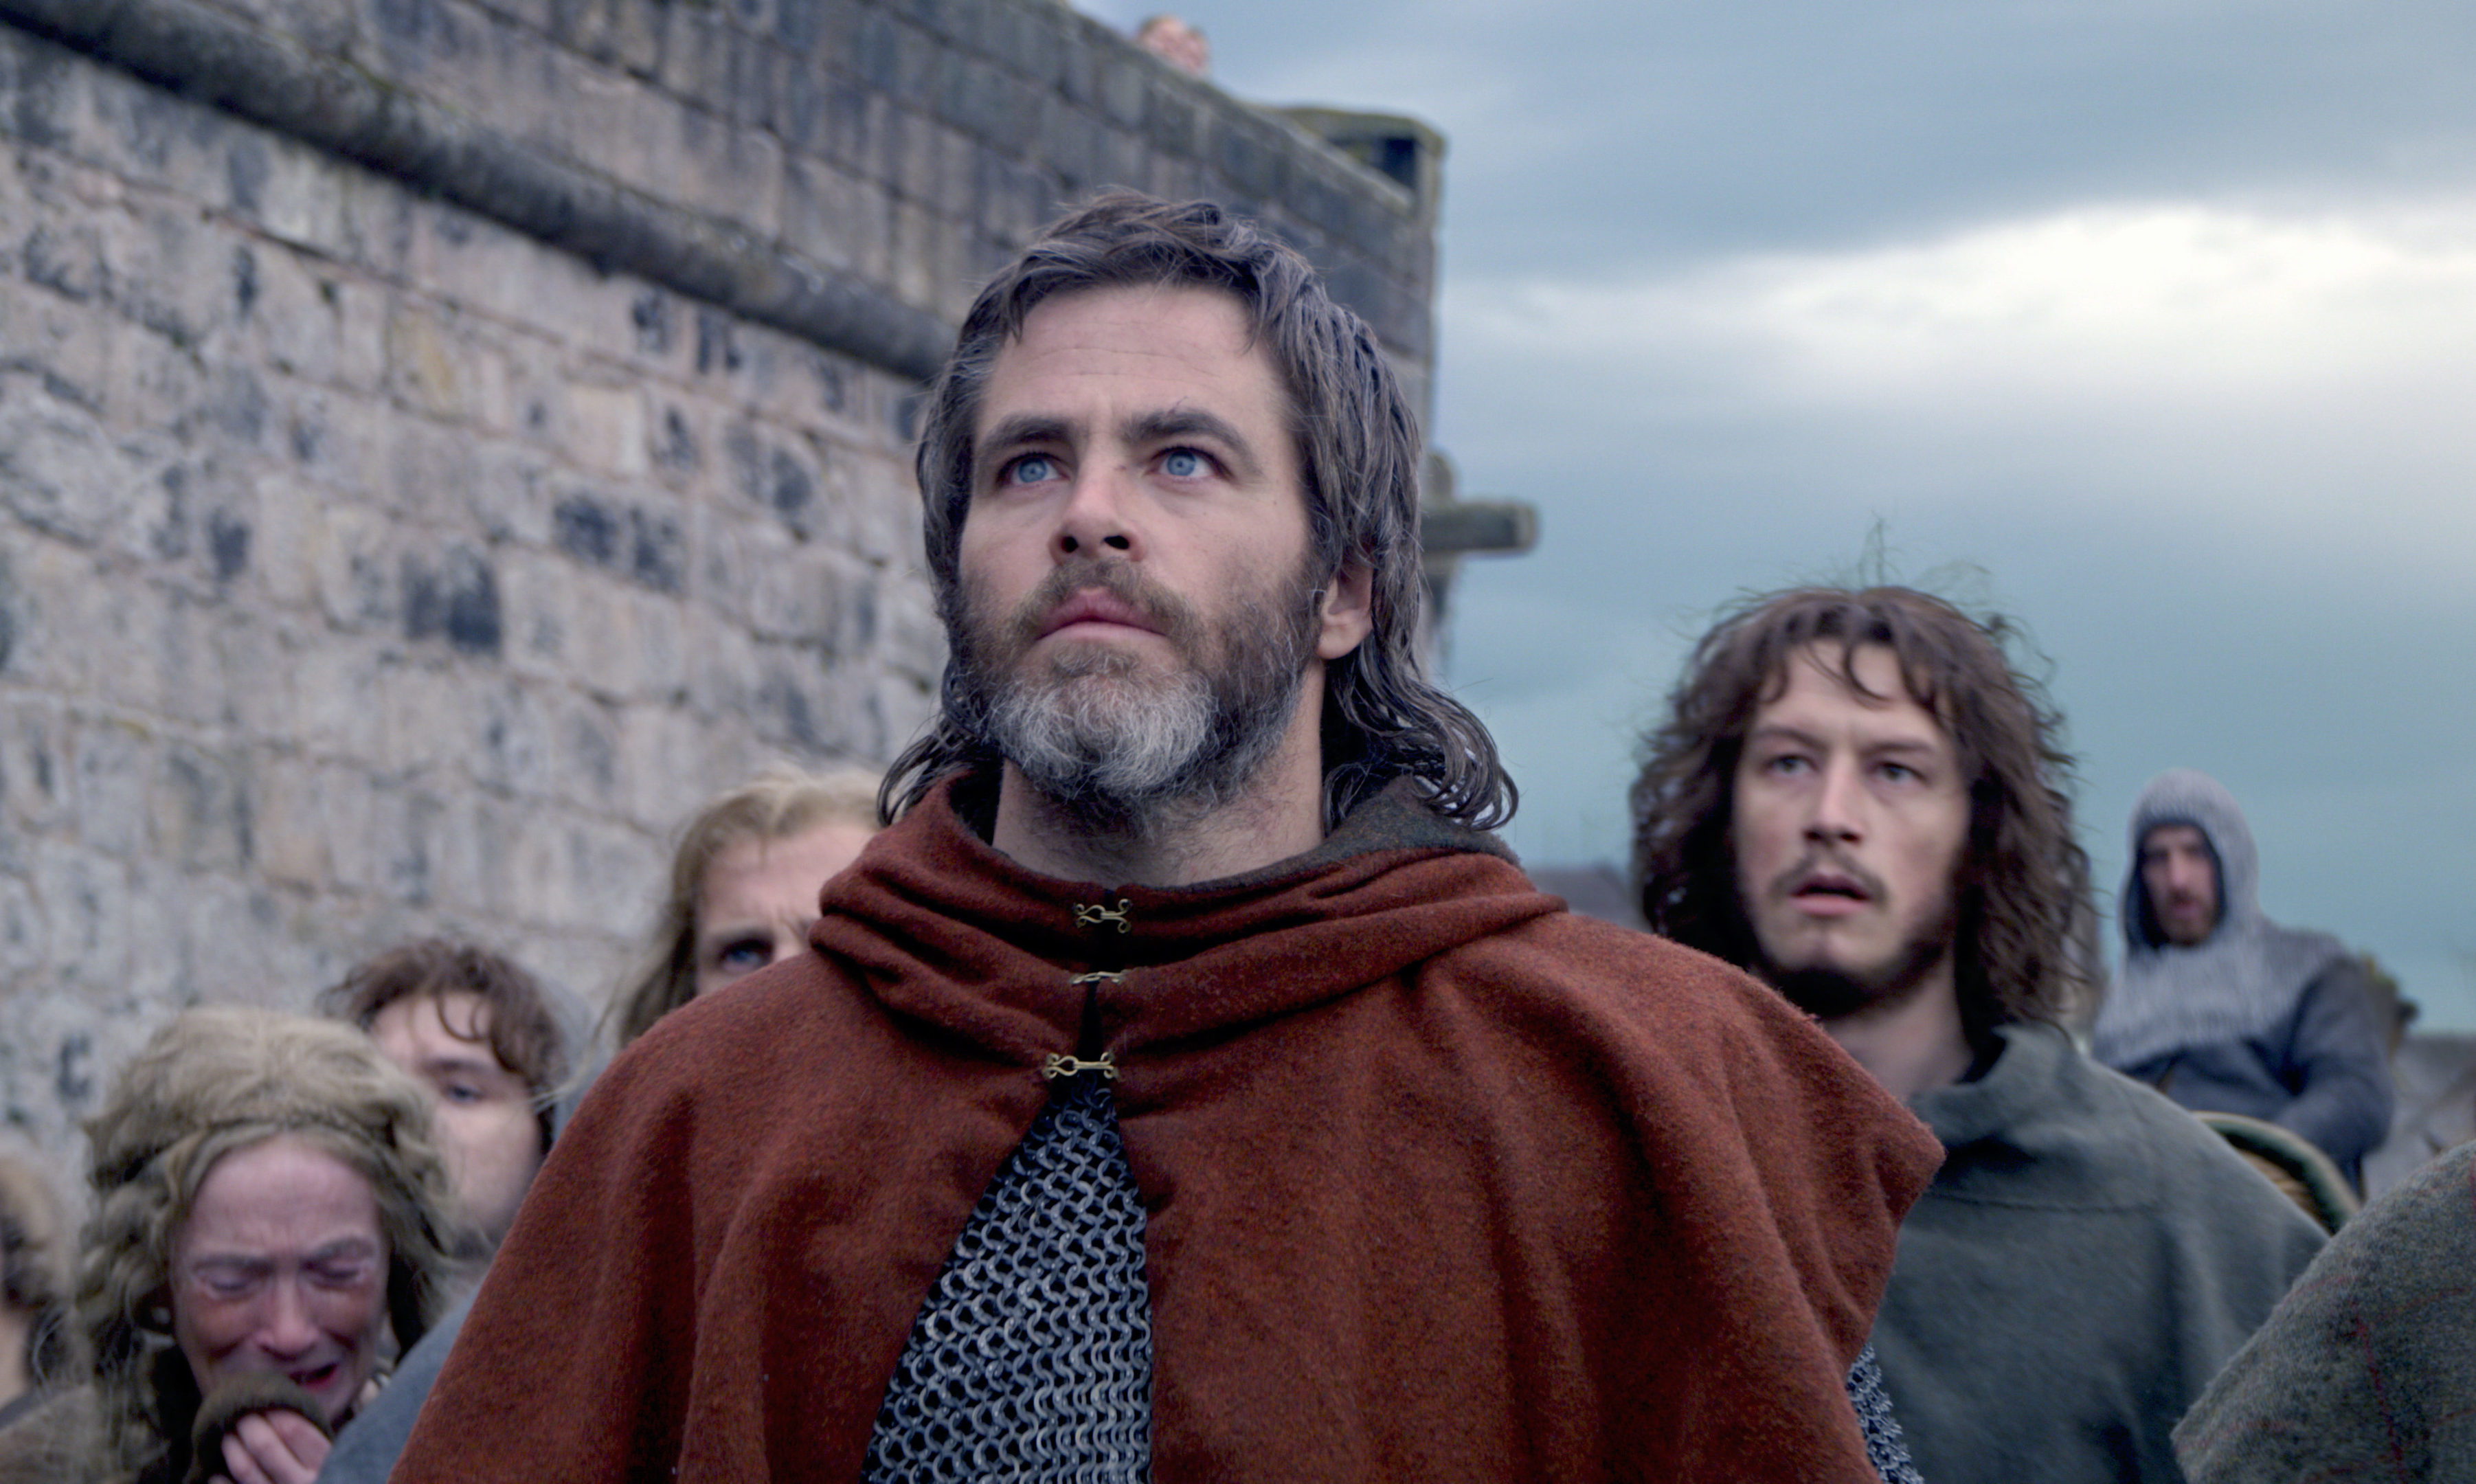 Chris Pine stars as Robert the Bruce in Outlaw King.